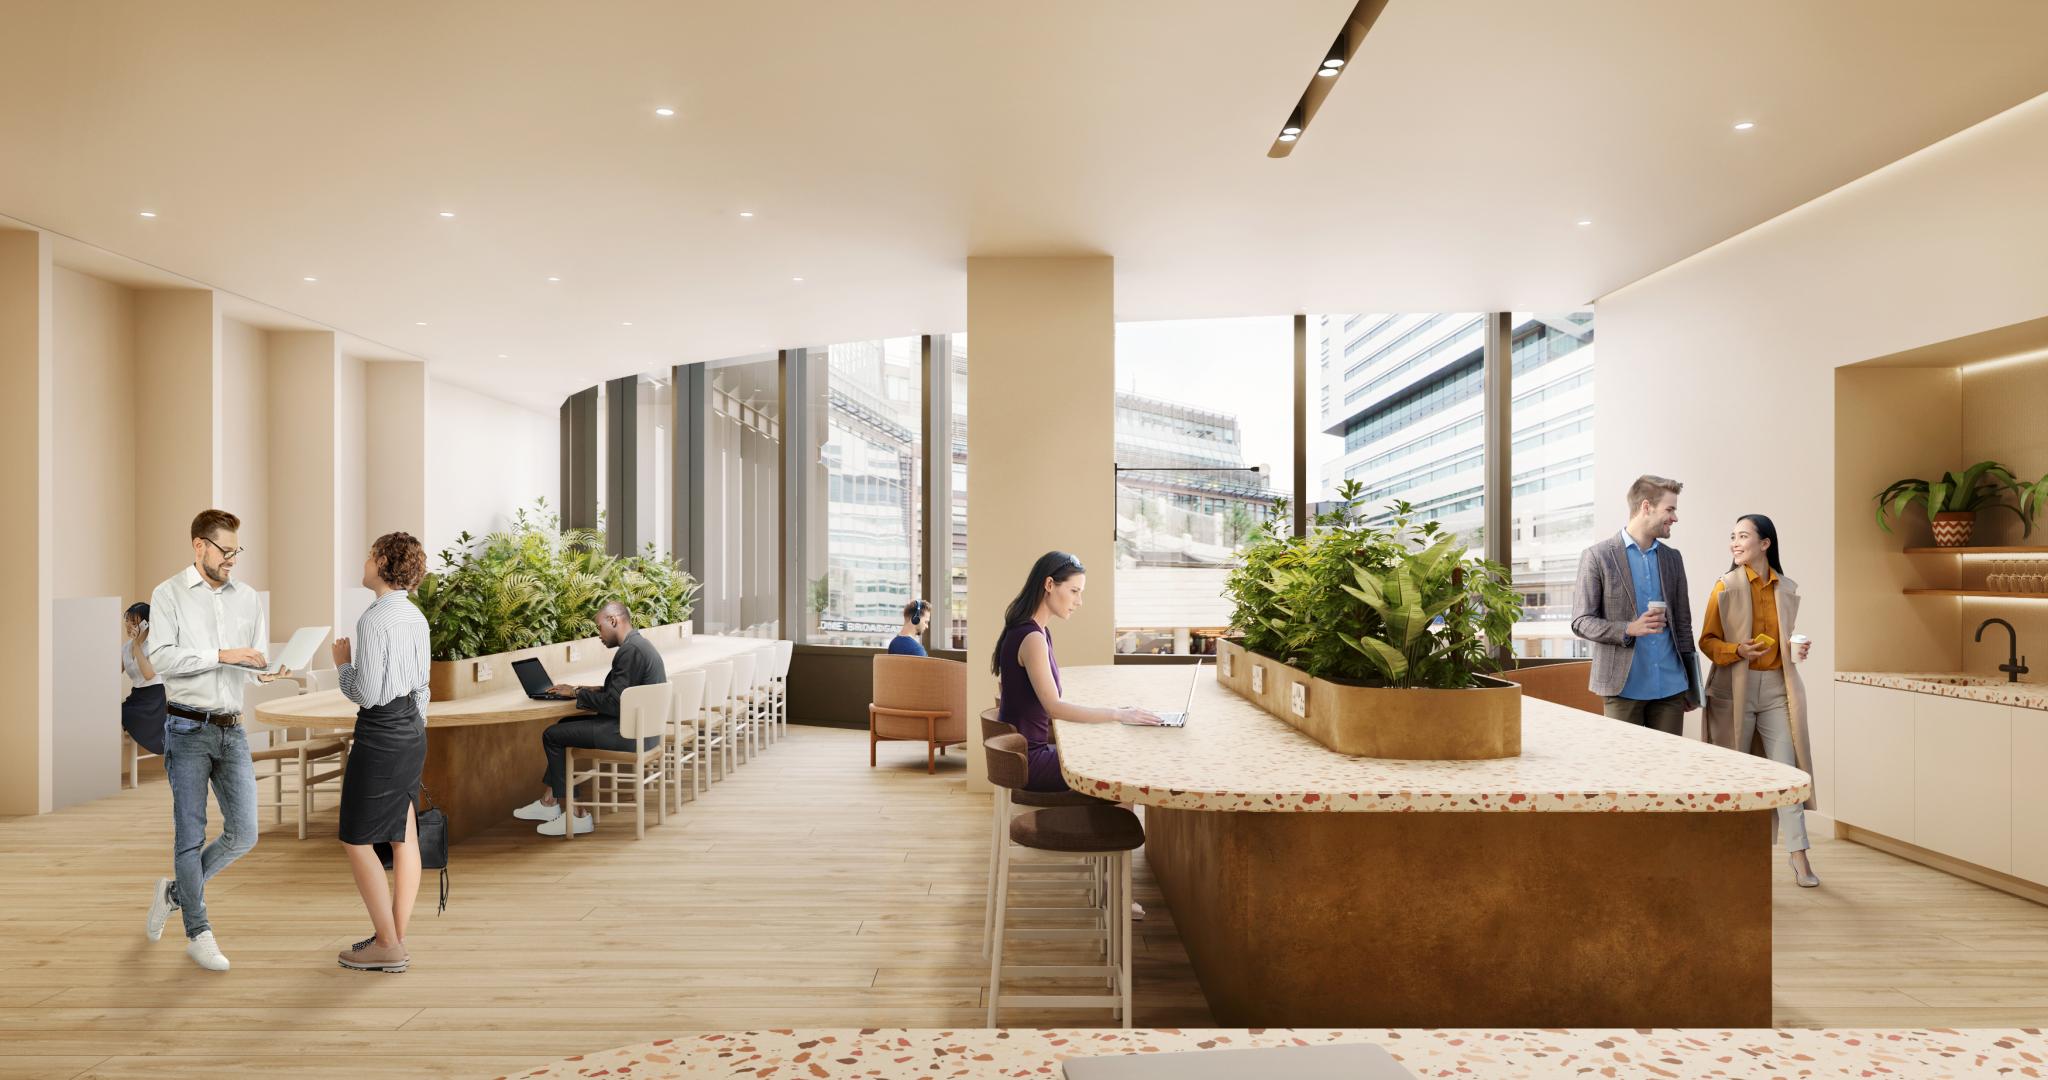 Storey launches new, flexible workspace at 100 Liverpool Street, Broadgate